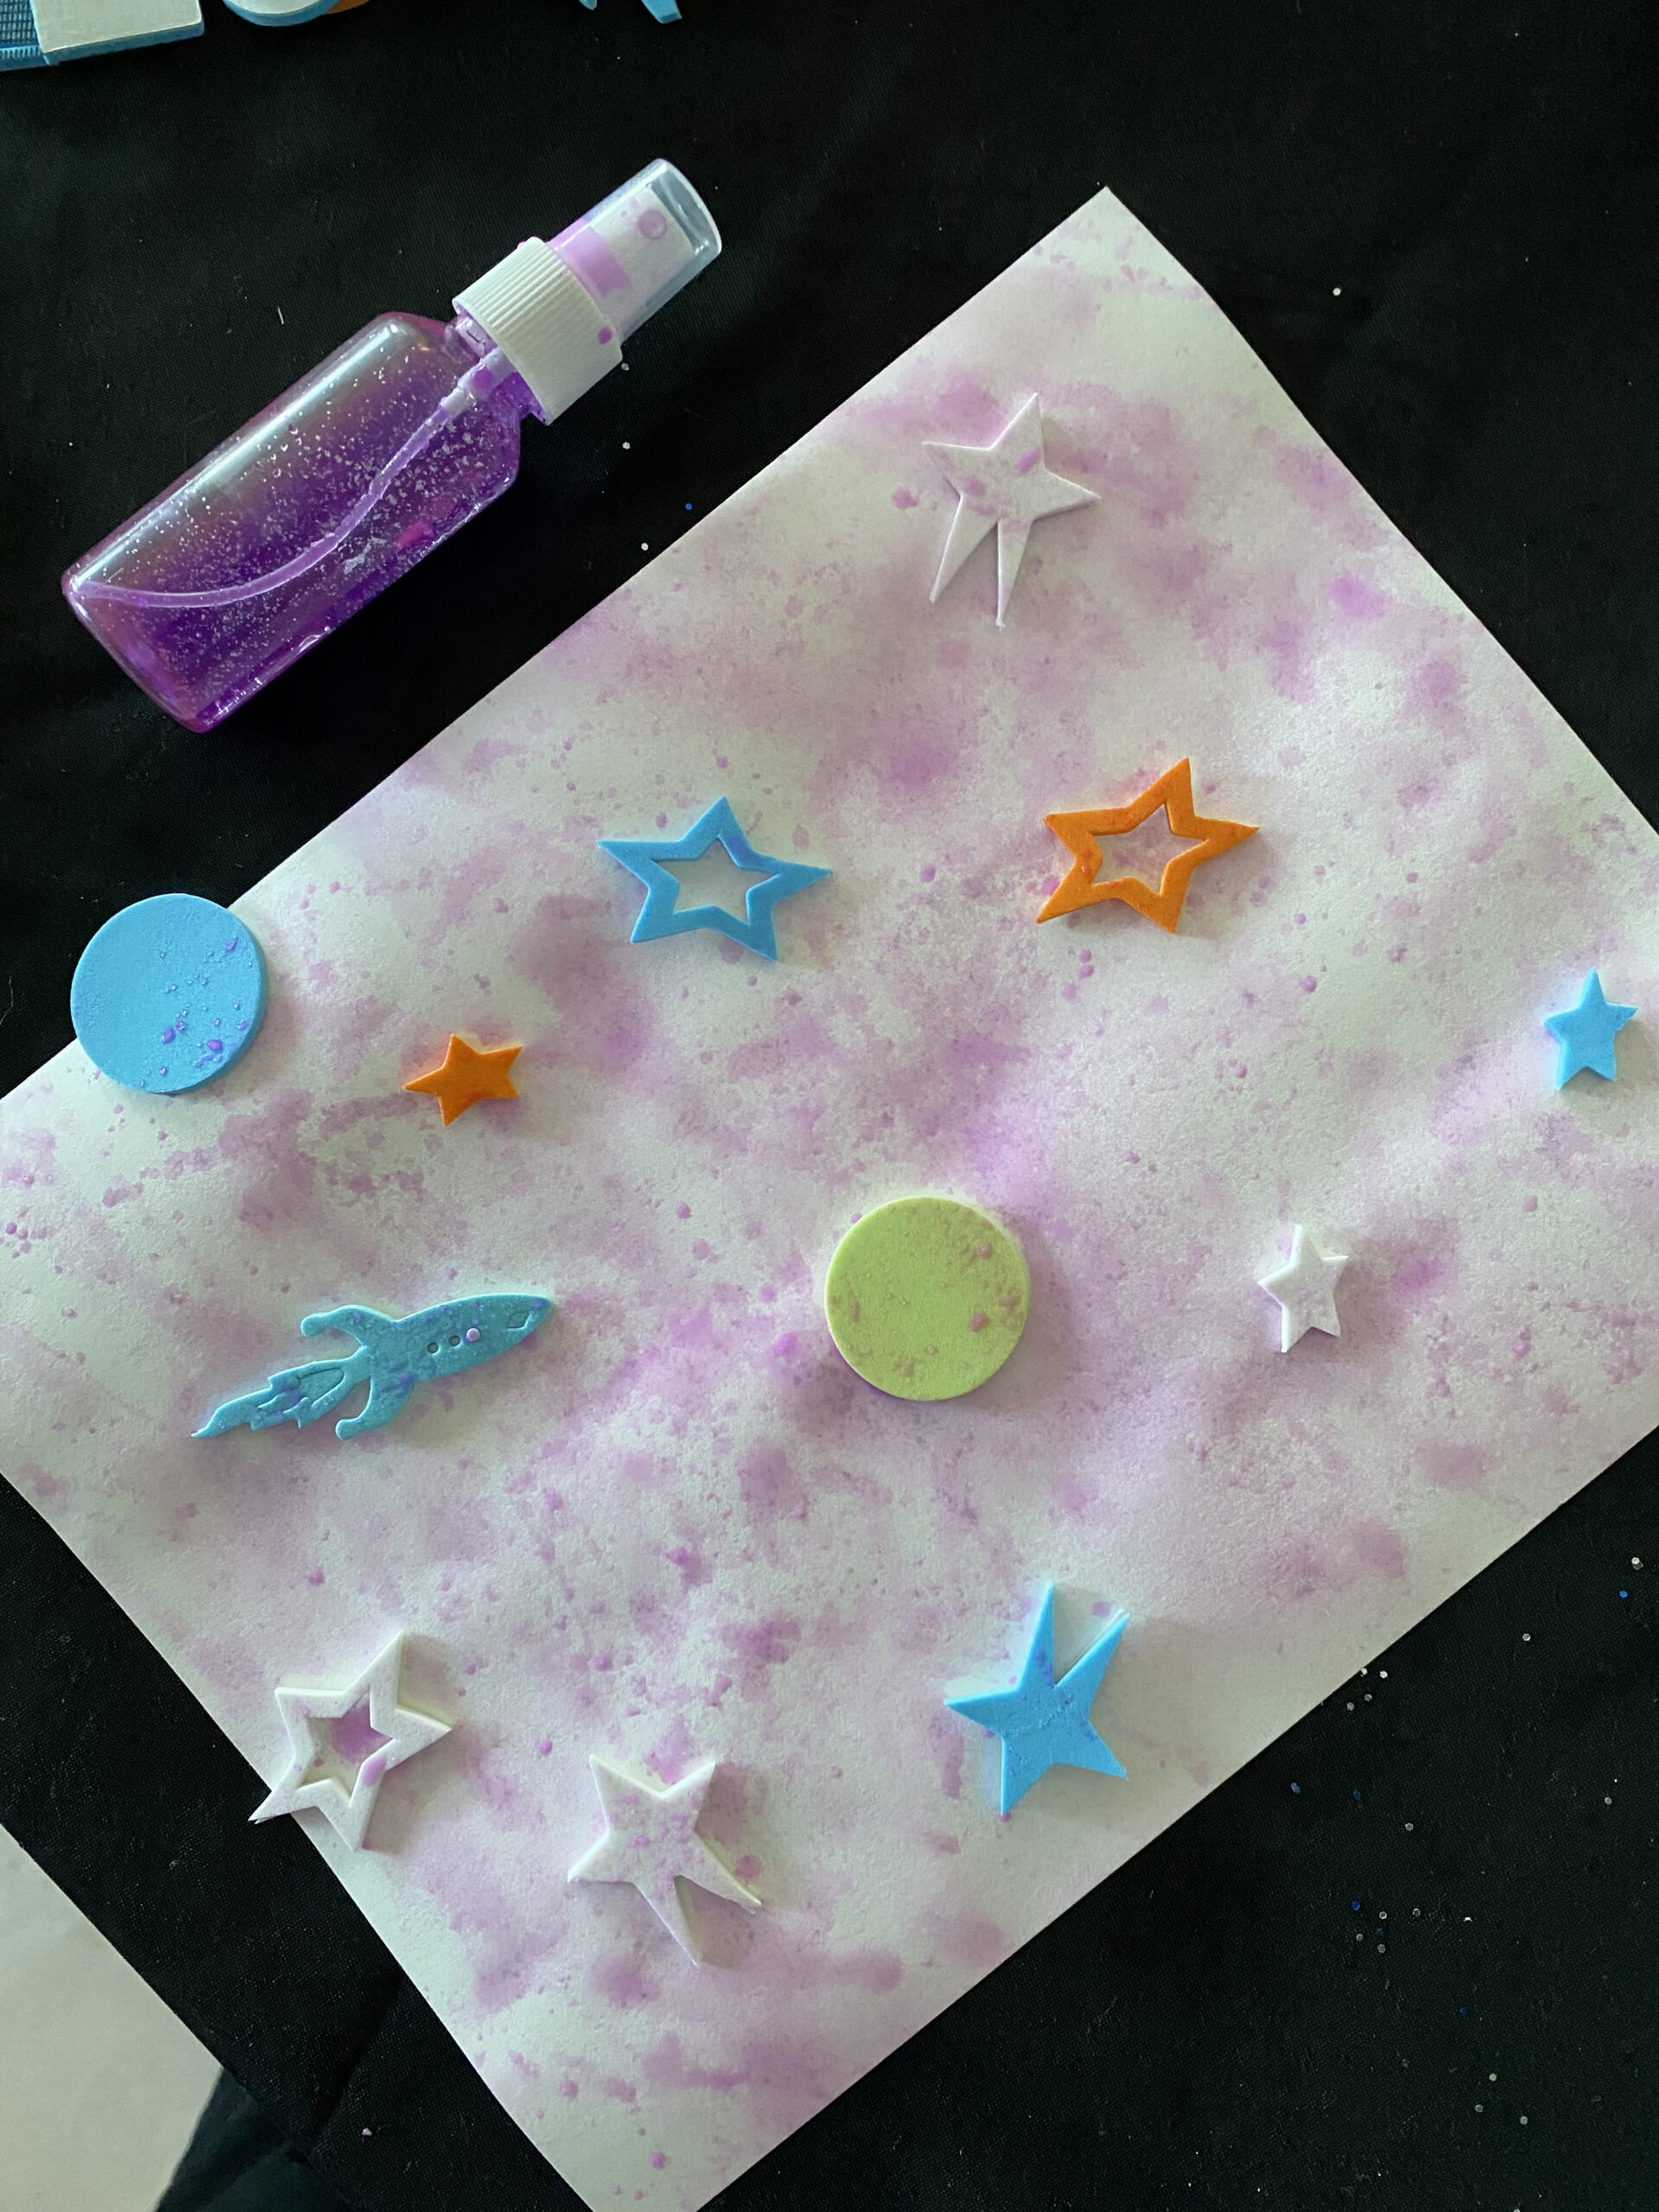 Splatter Painting: Here is a fun art lesson to include in your Outer Space Unit. Let's learn about our Galaxy while incorporating Splatter Painting and Graffiti Art.